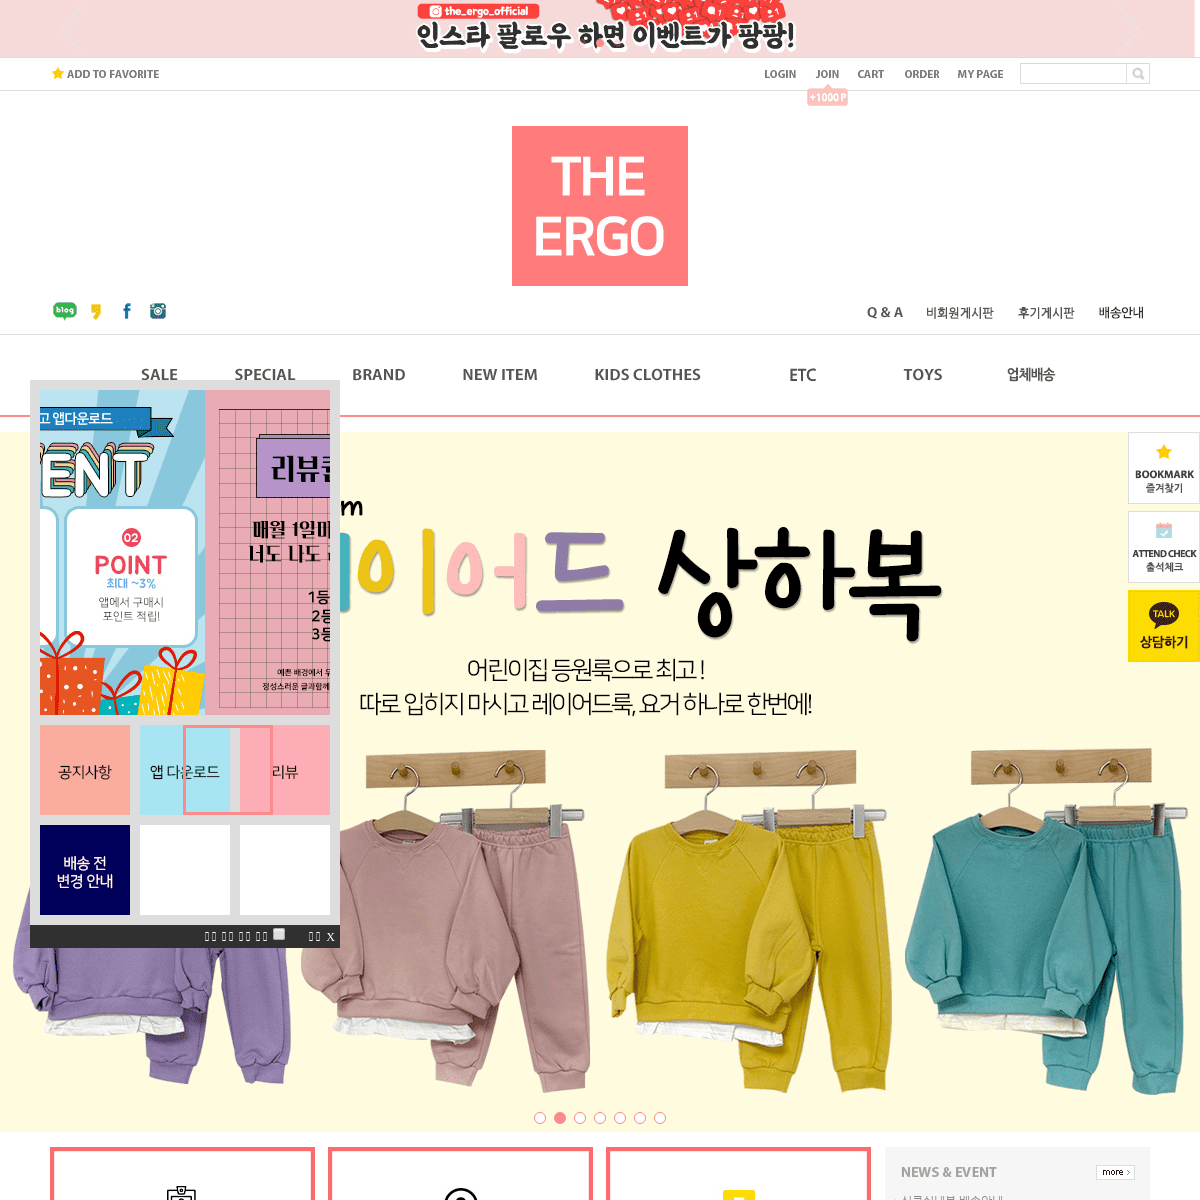 A complete backup of theergo.co.kr